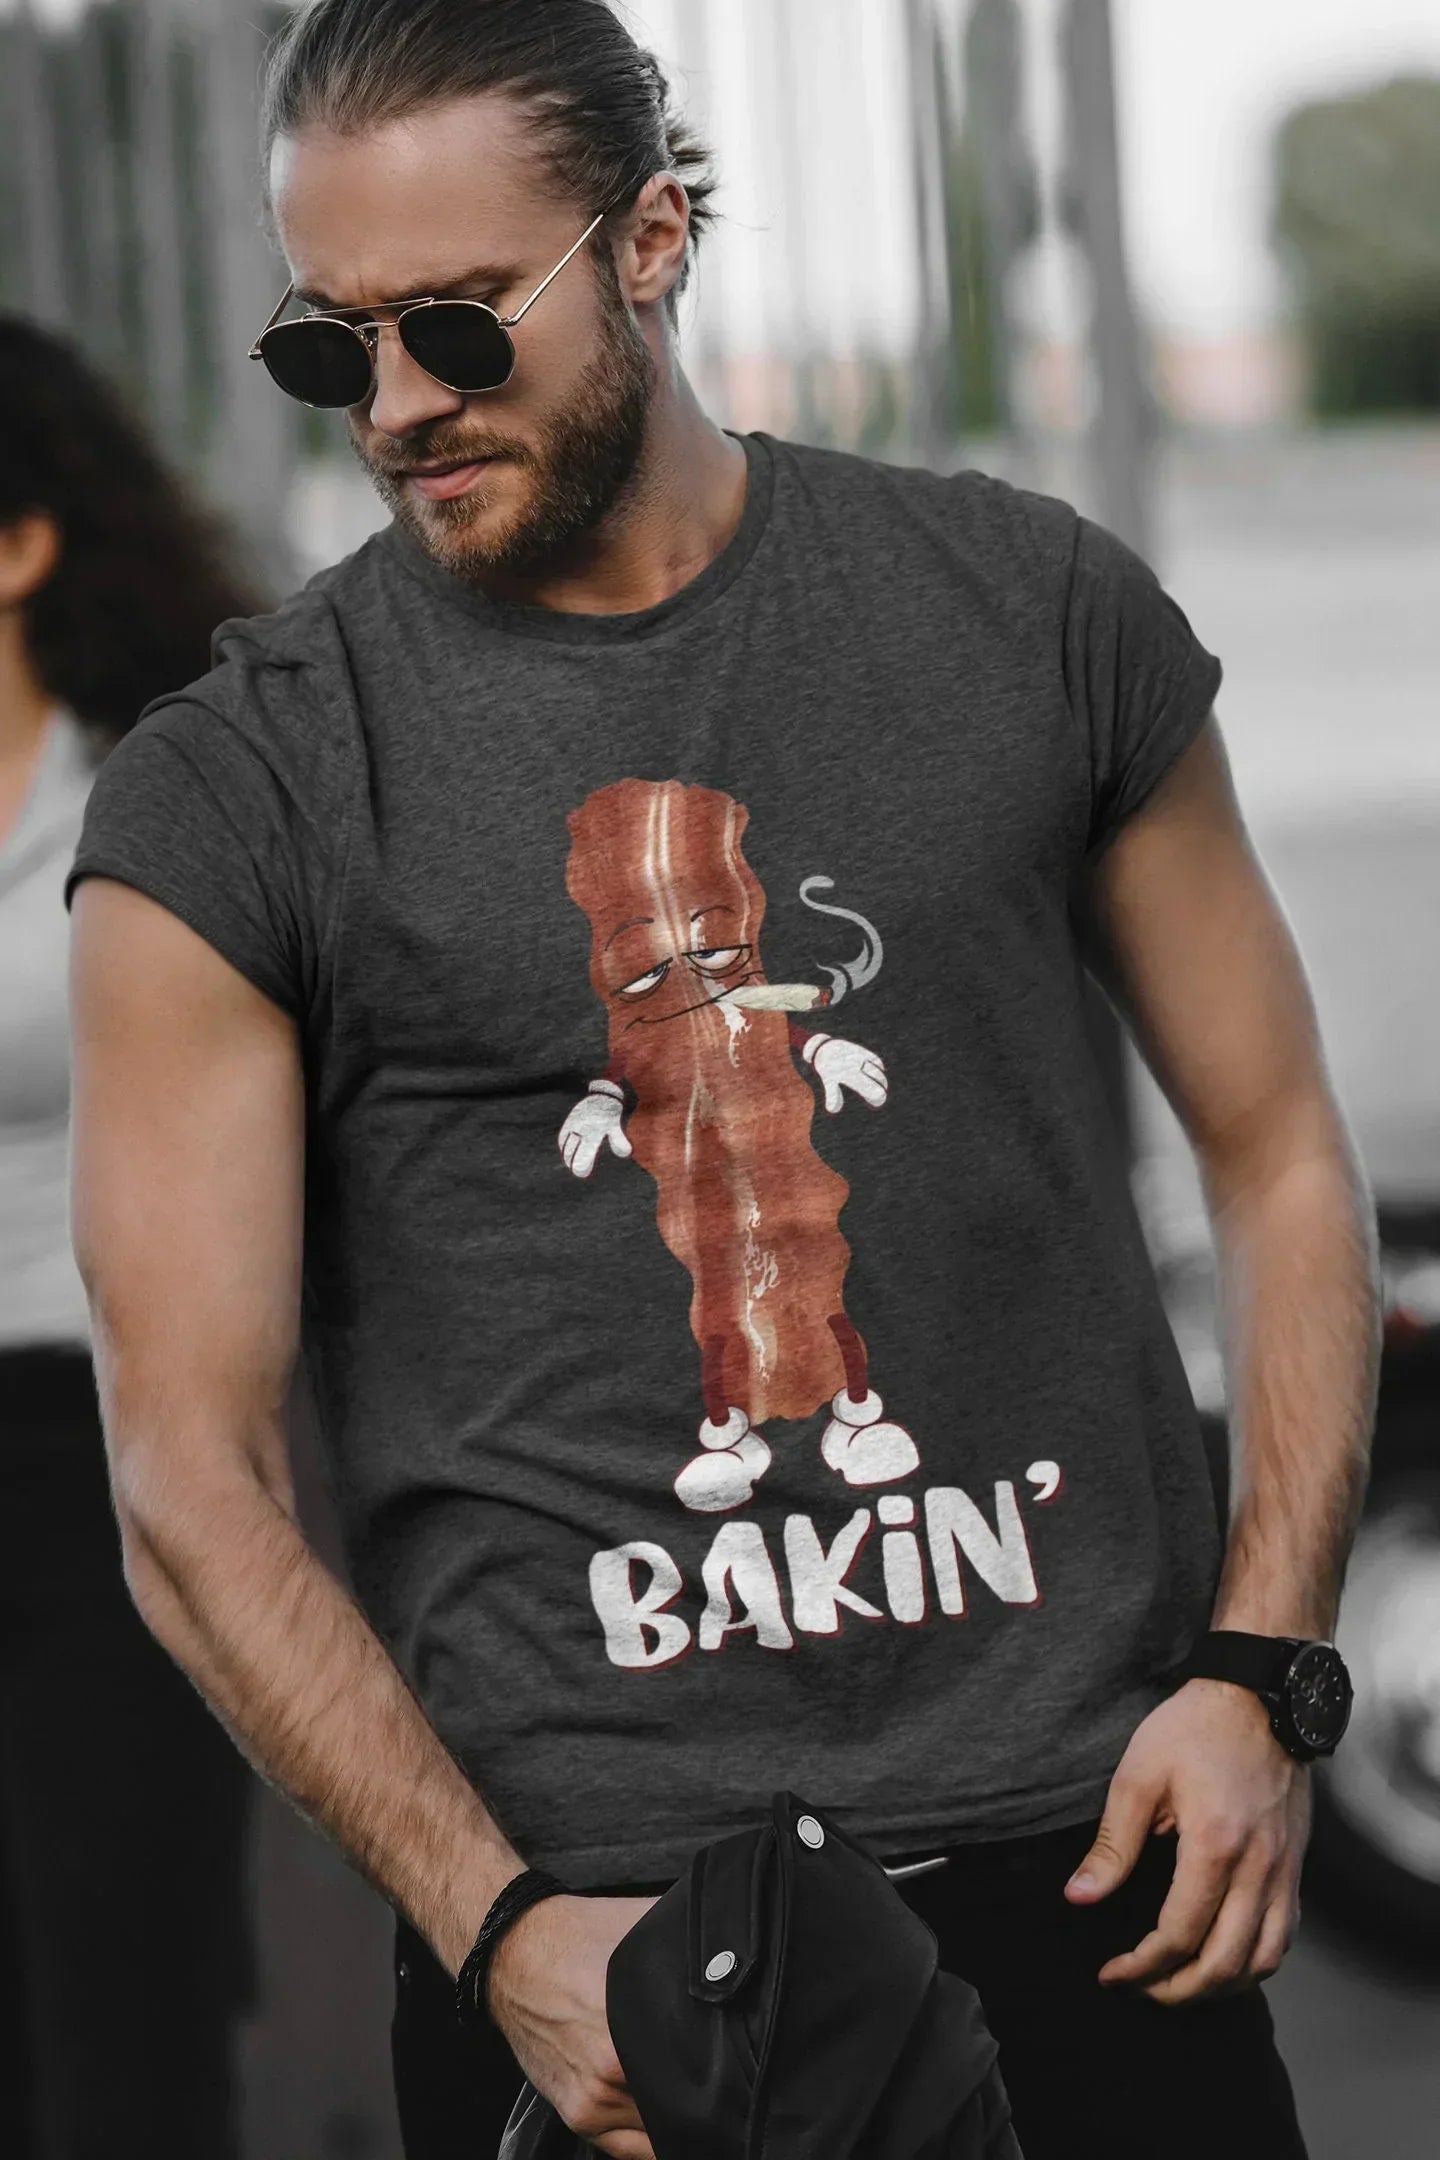 Stoner Gifts, Hippie Clothes, Weed Gifts, Weed Shirt, Stoner Gift, Stoner Girl, Stoner Gift for Him, Bakin Gift for Her, Marijuana T shirts HMDesignStudioUS